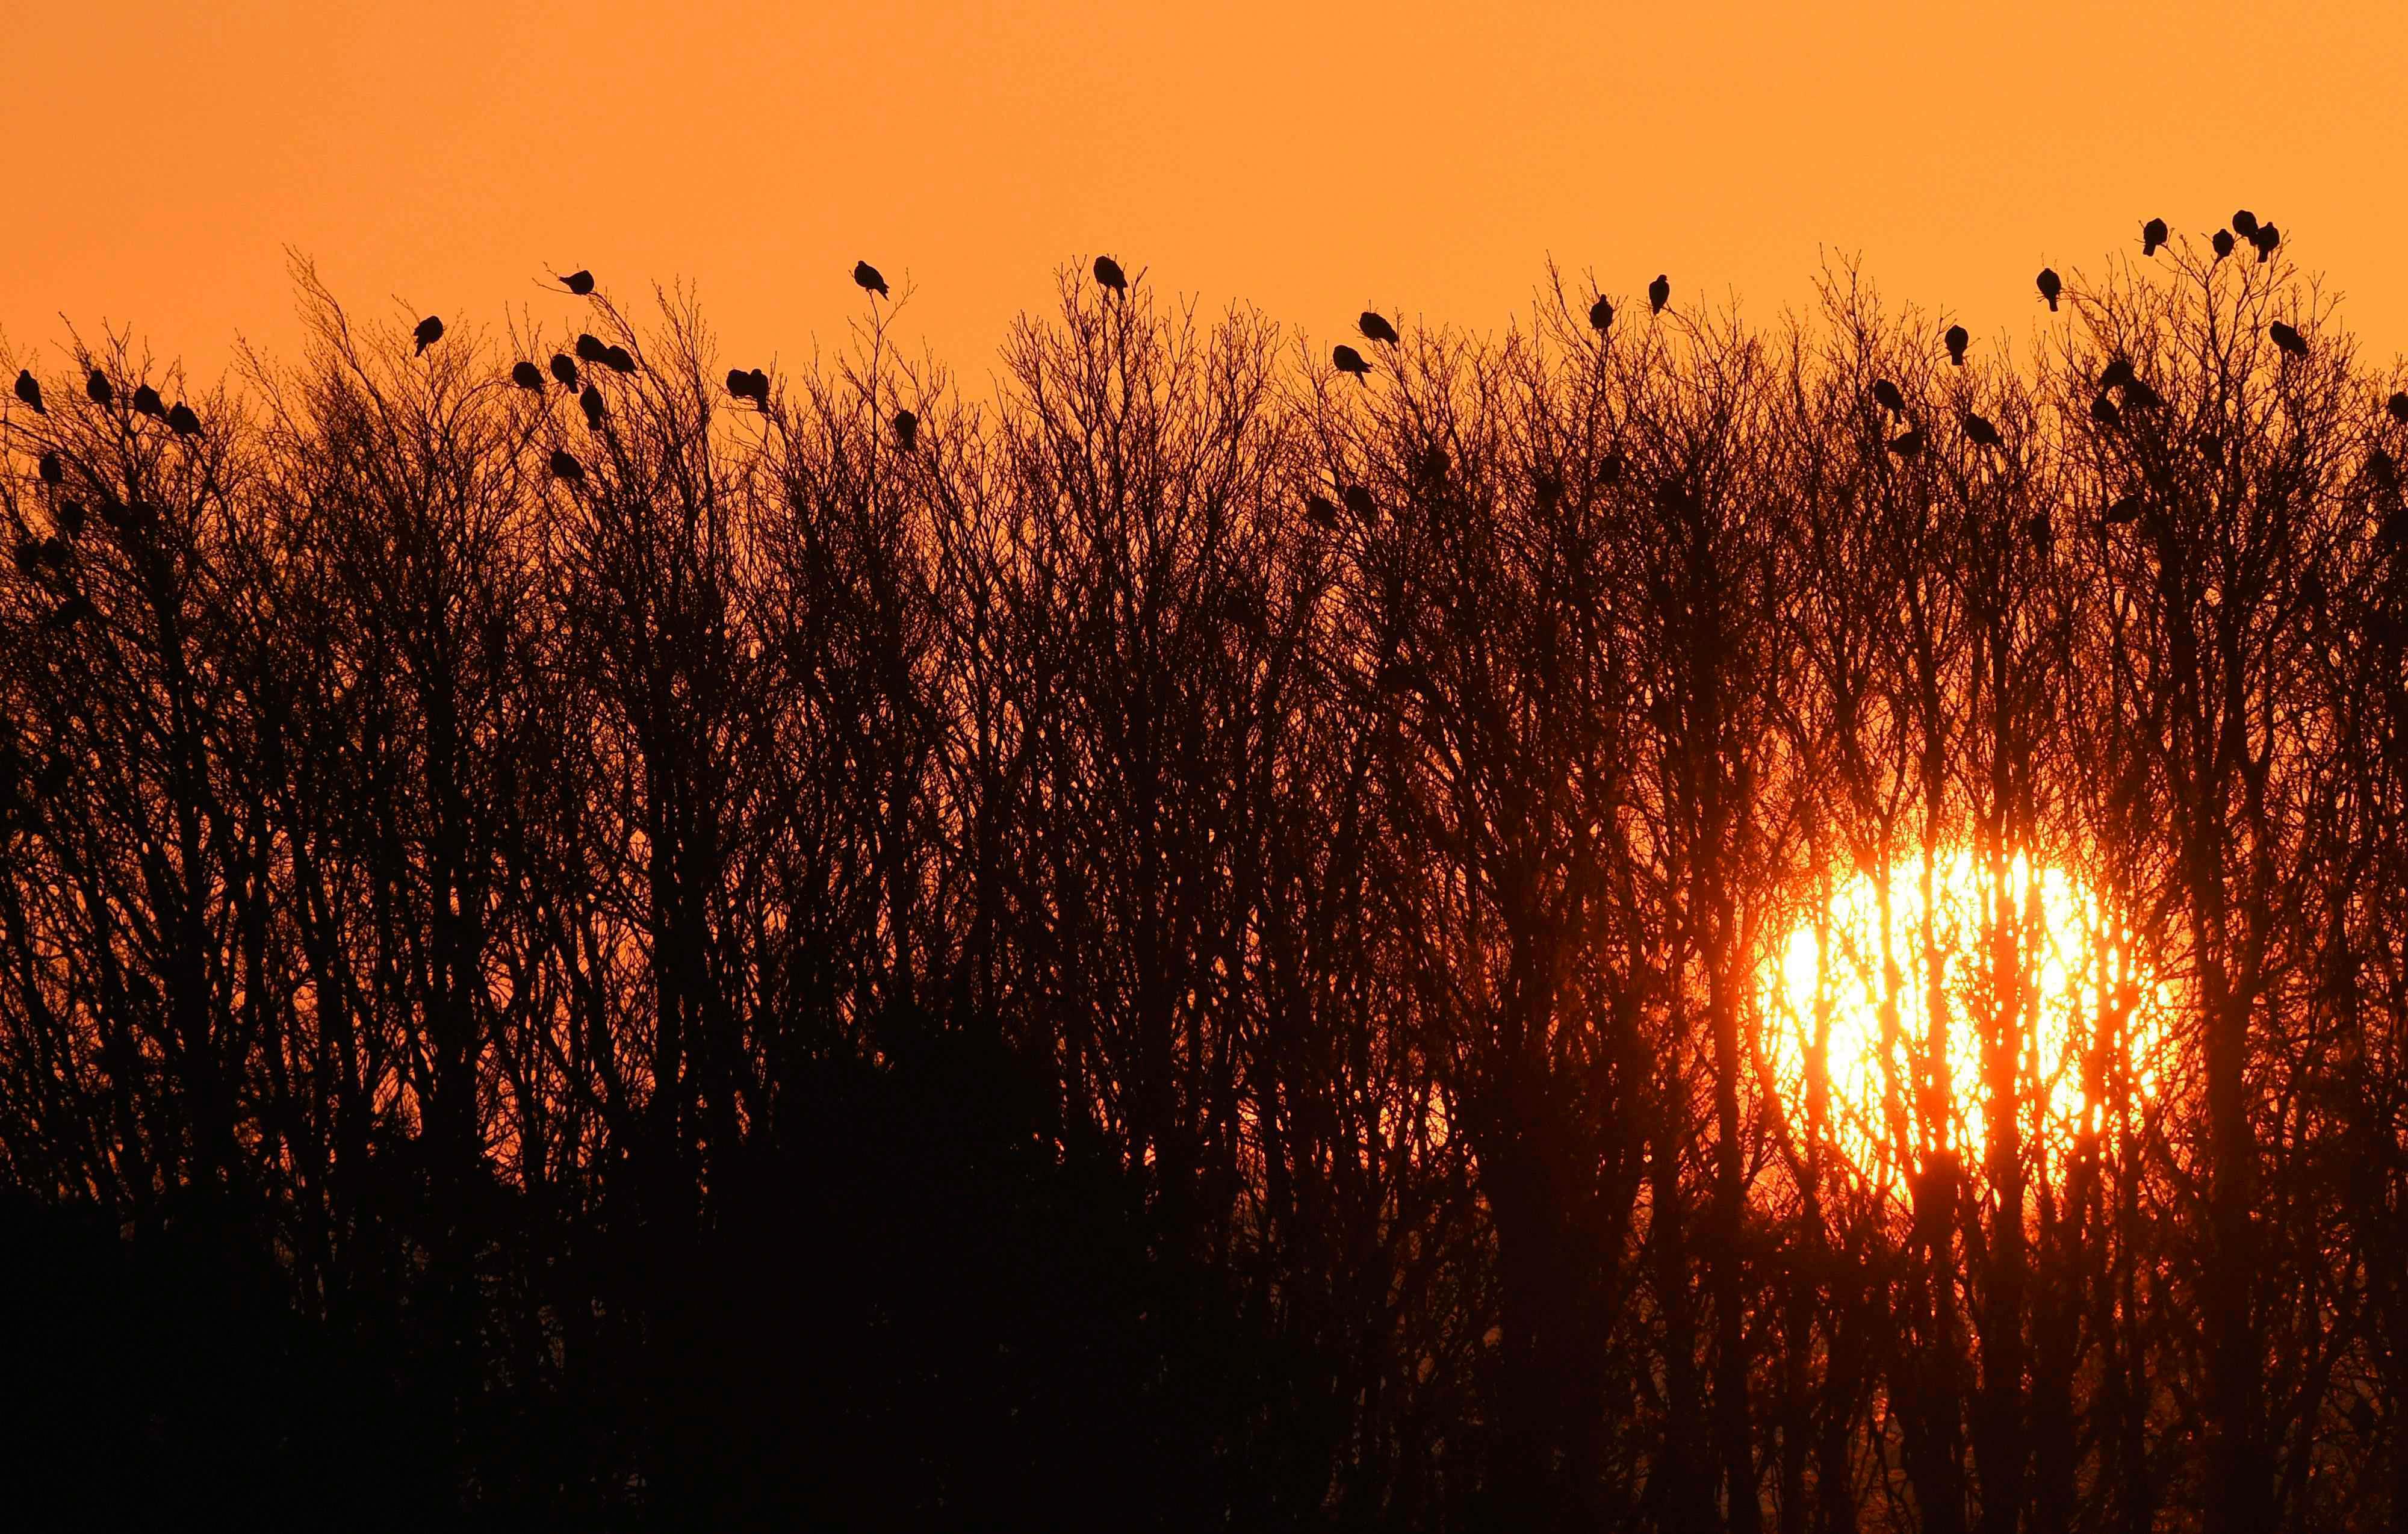 Birds roost in trees at sunrise near the coastline of The Wash near Snettisham in east Britain